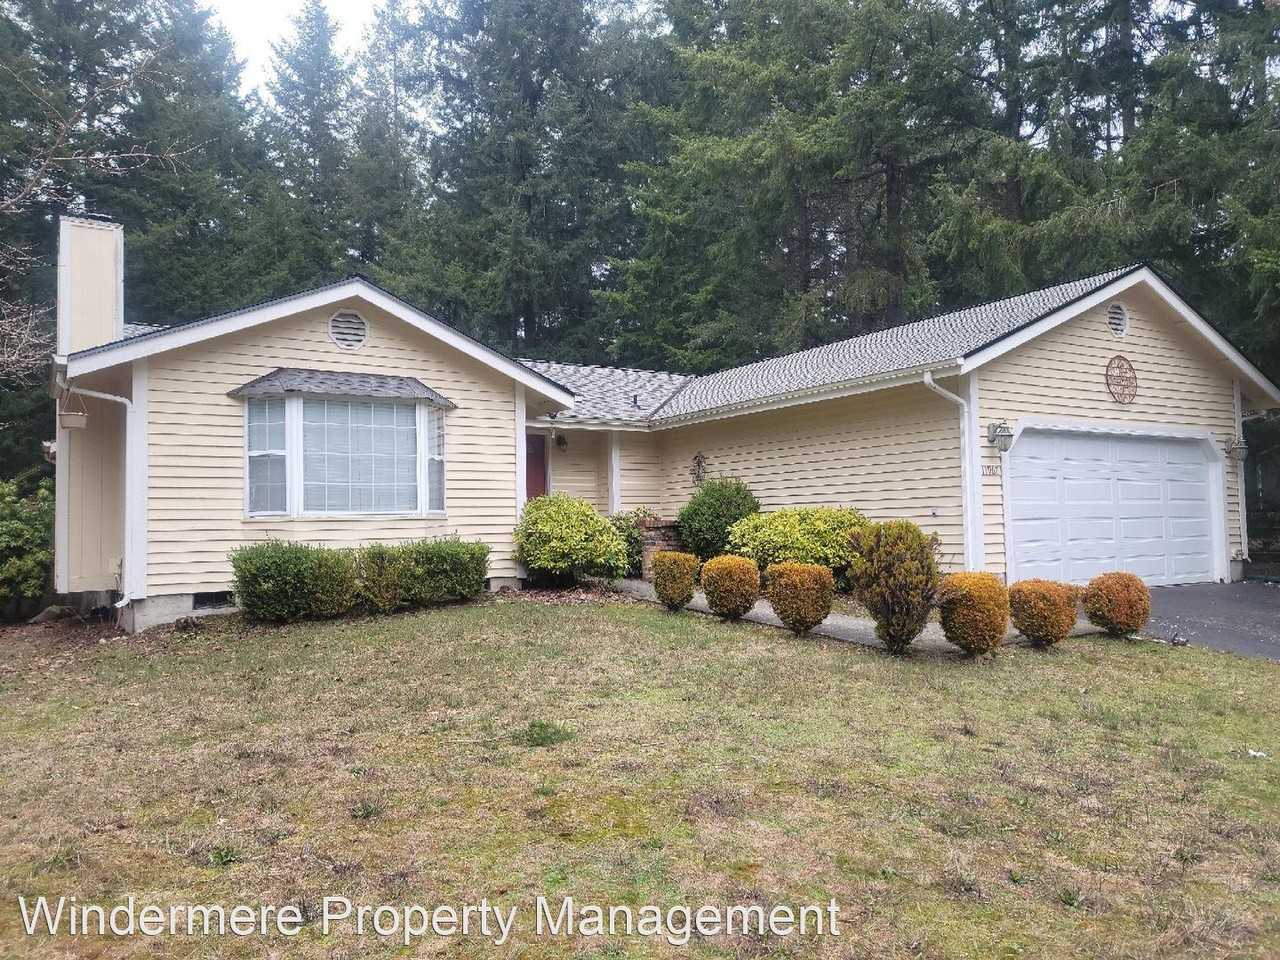 11967 Avellana Cir Nw, Silverdale, WA 98383 3 Bedroom House for  $2,400/month - Zumper